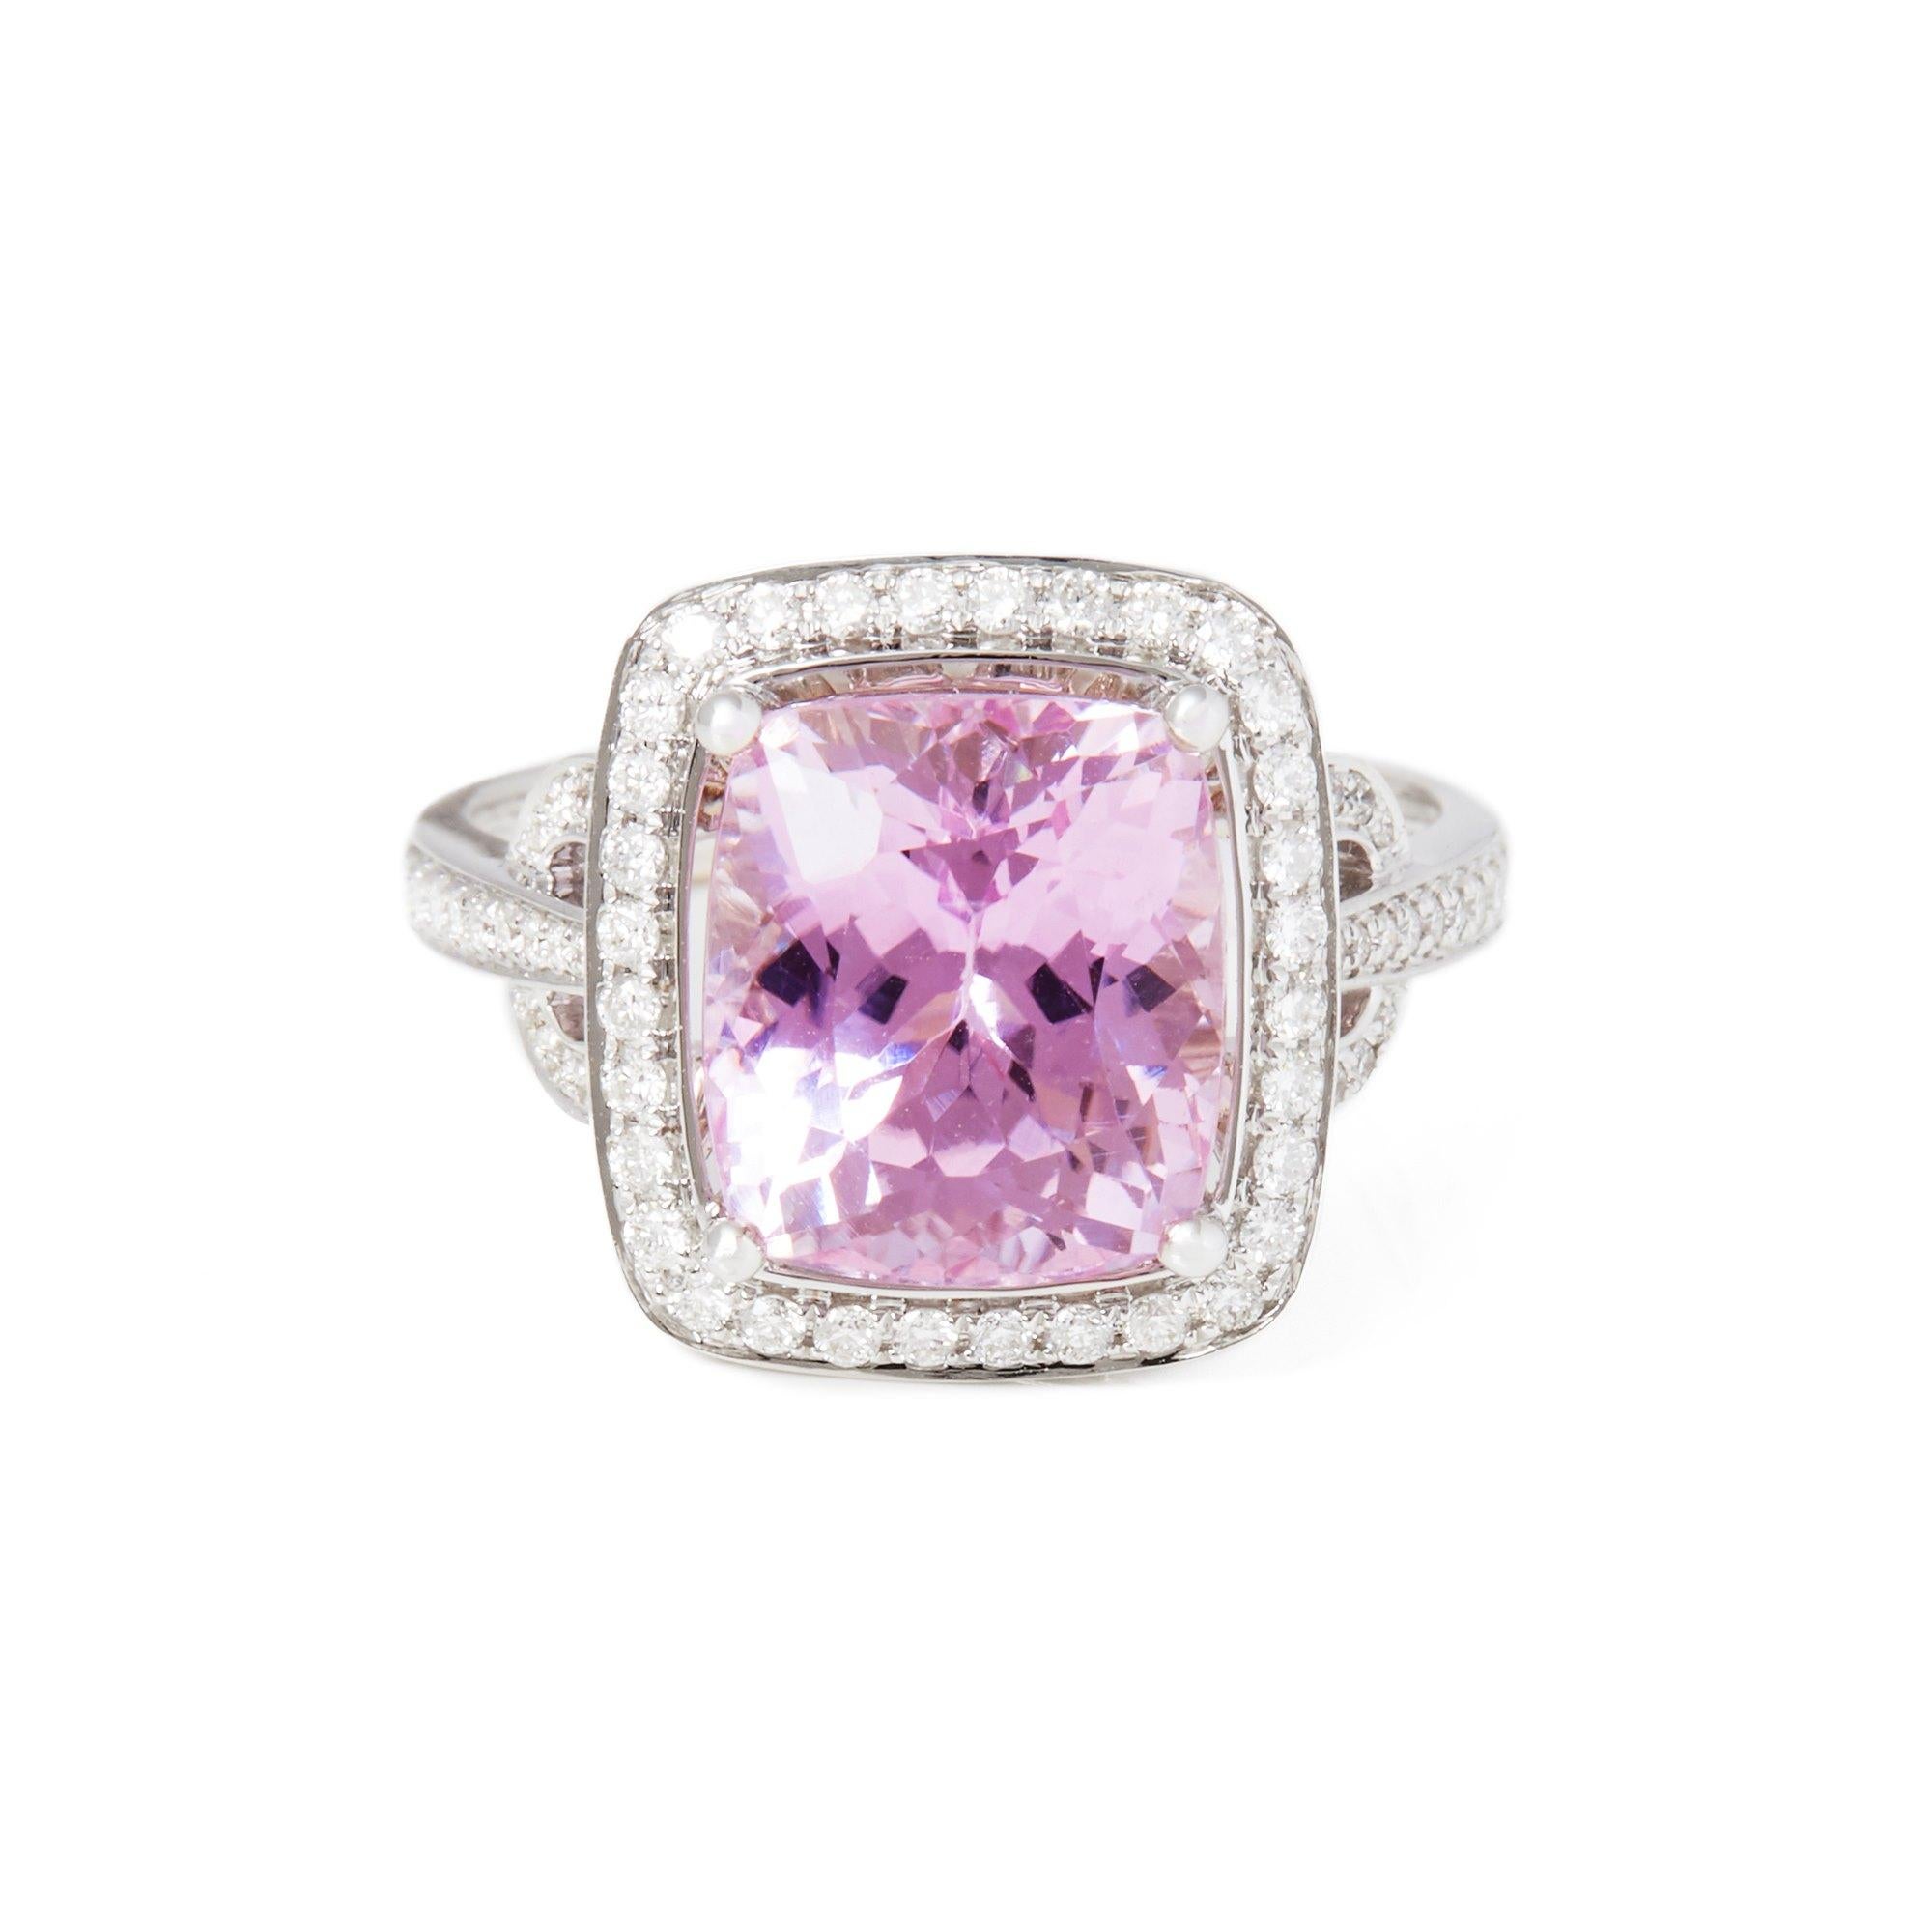 Certified 5.69ct Cushion Cut Kunzite and Diamond 18ct gold Ring In Excellent Condition For Sale In Bishop's Stortford, Hertfordshire